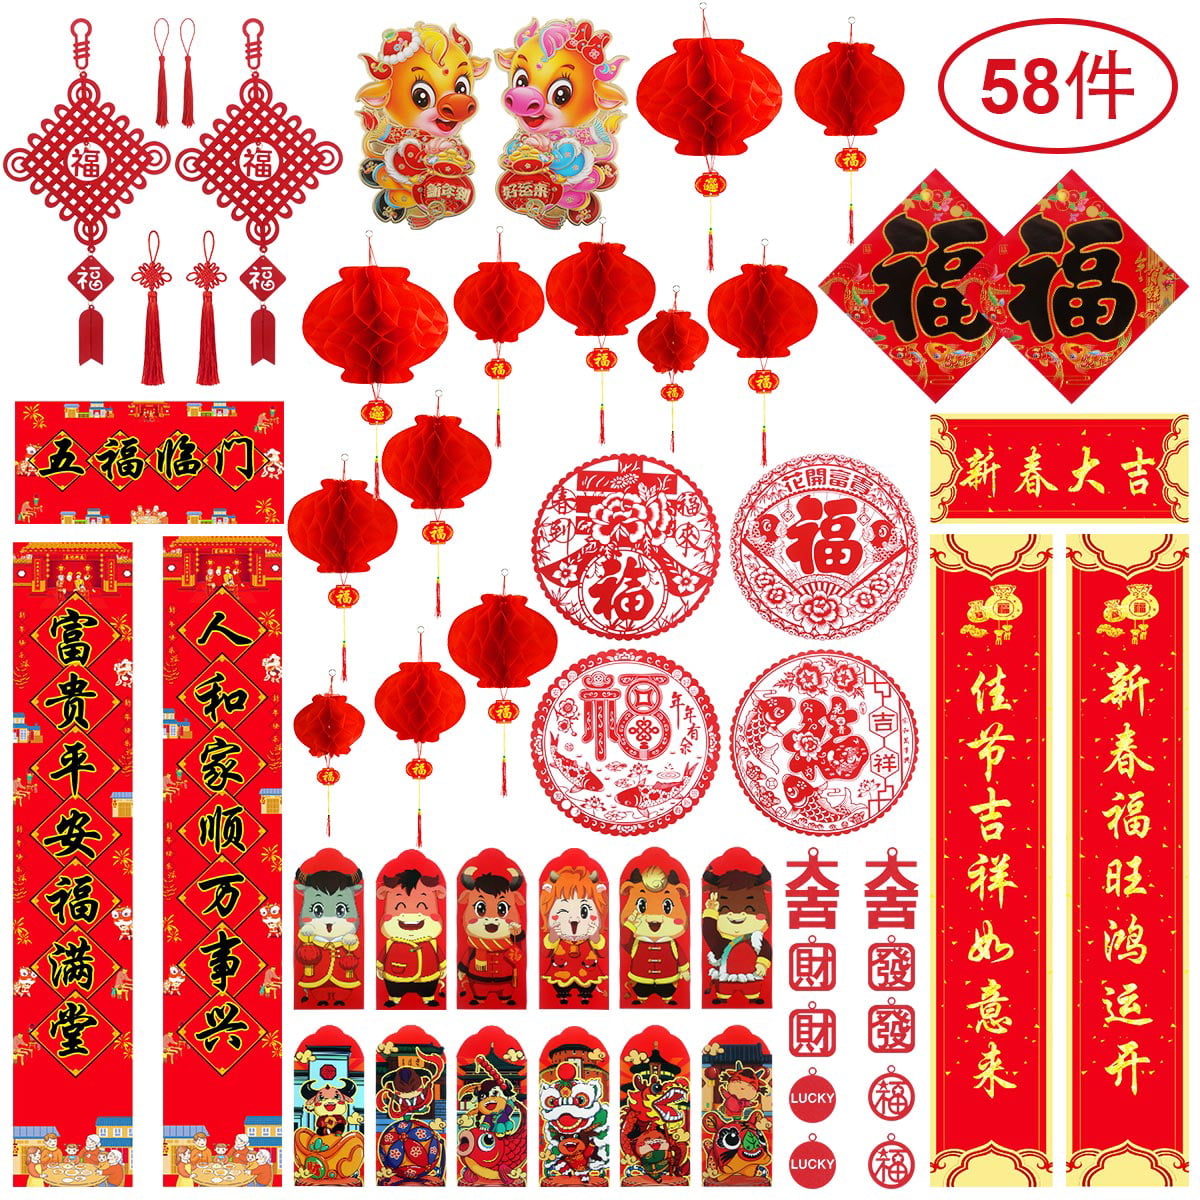 2020 Spring Festival Couplets 2 Sets Chinese New Year Couplet Decorations,Lunar New Year Duilian,Chunlian,Window Sticker,Fu Wallpaper,Red Envelope,Gift Bag by WaaHaa 